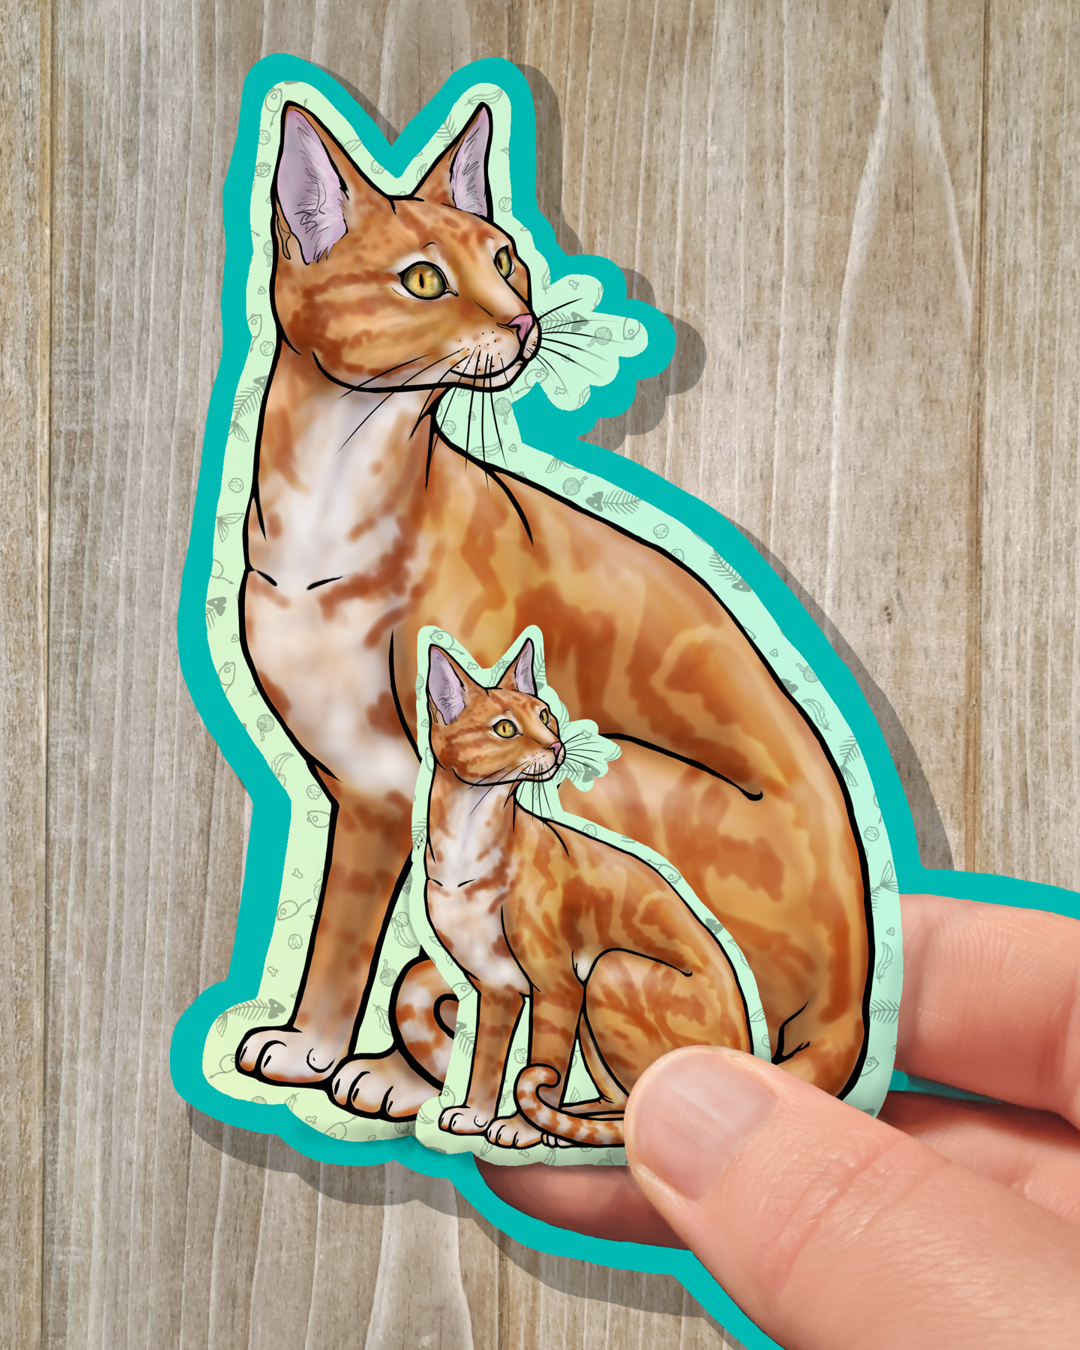 Custom Cat Laminated Vinyl Stickers Your-cat-here YCH with Digital Art File